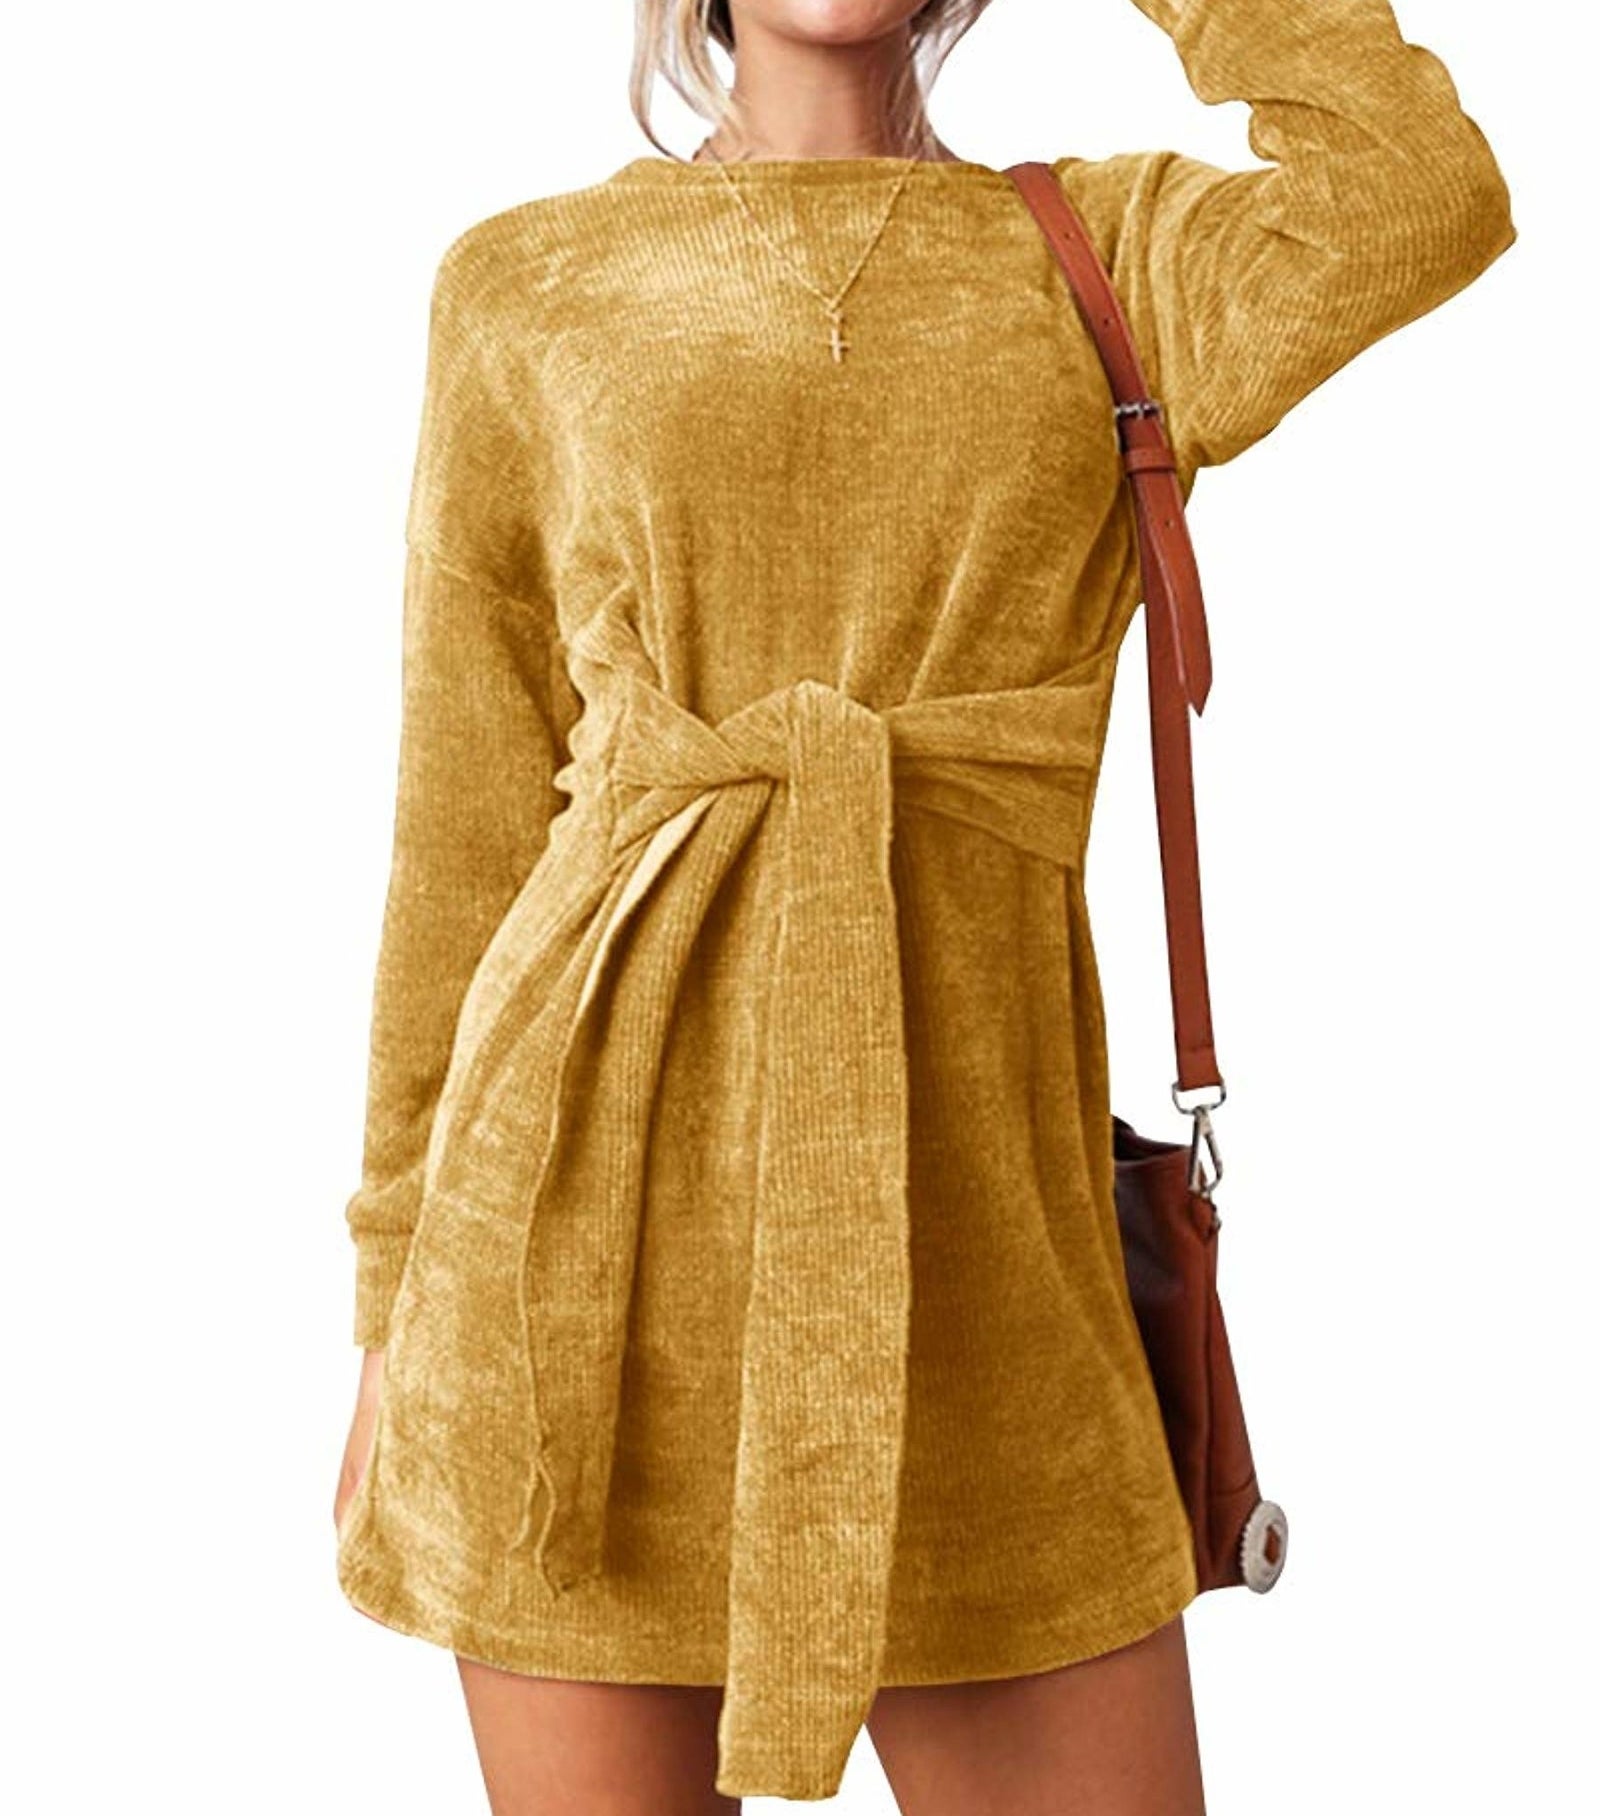 32 Sweater Dresses For People Who Hate Pants As Much As They Hate Being ...